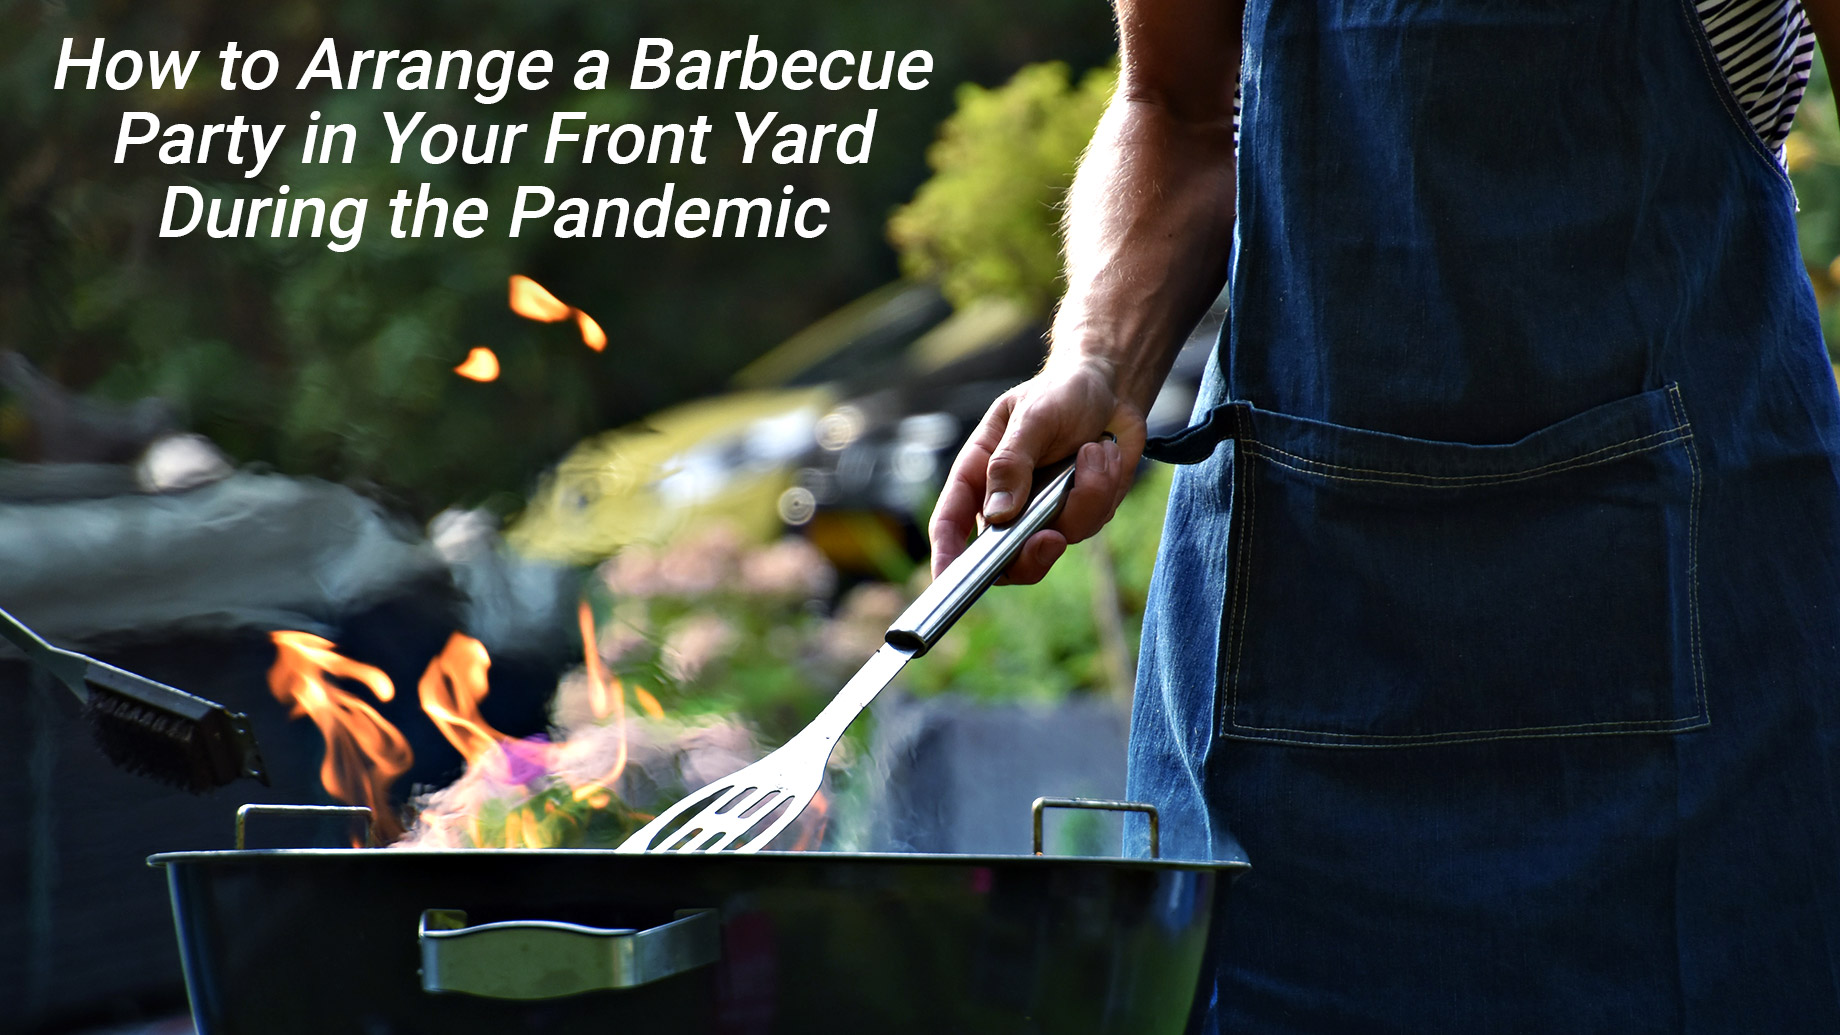 How to Arrange a Barbecue Party in Your Front Yard During the Pandemic